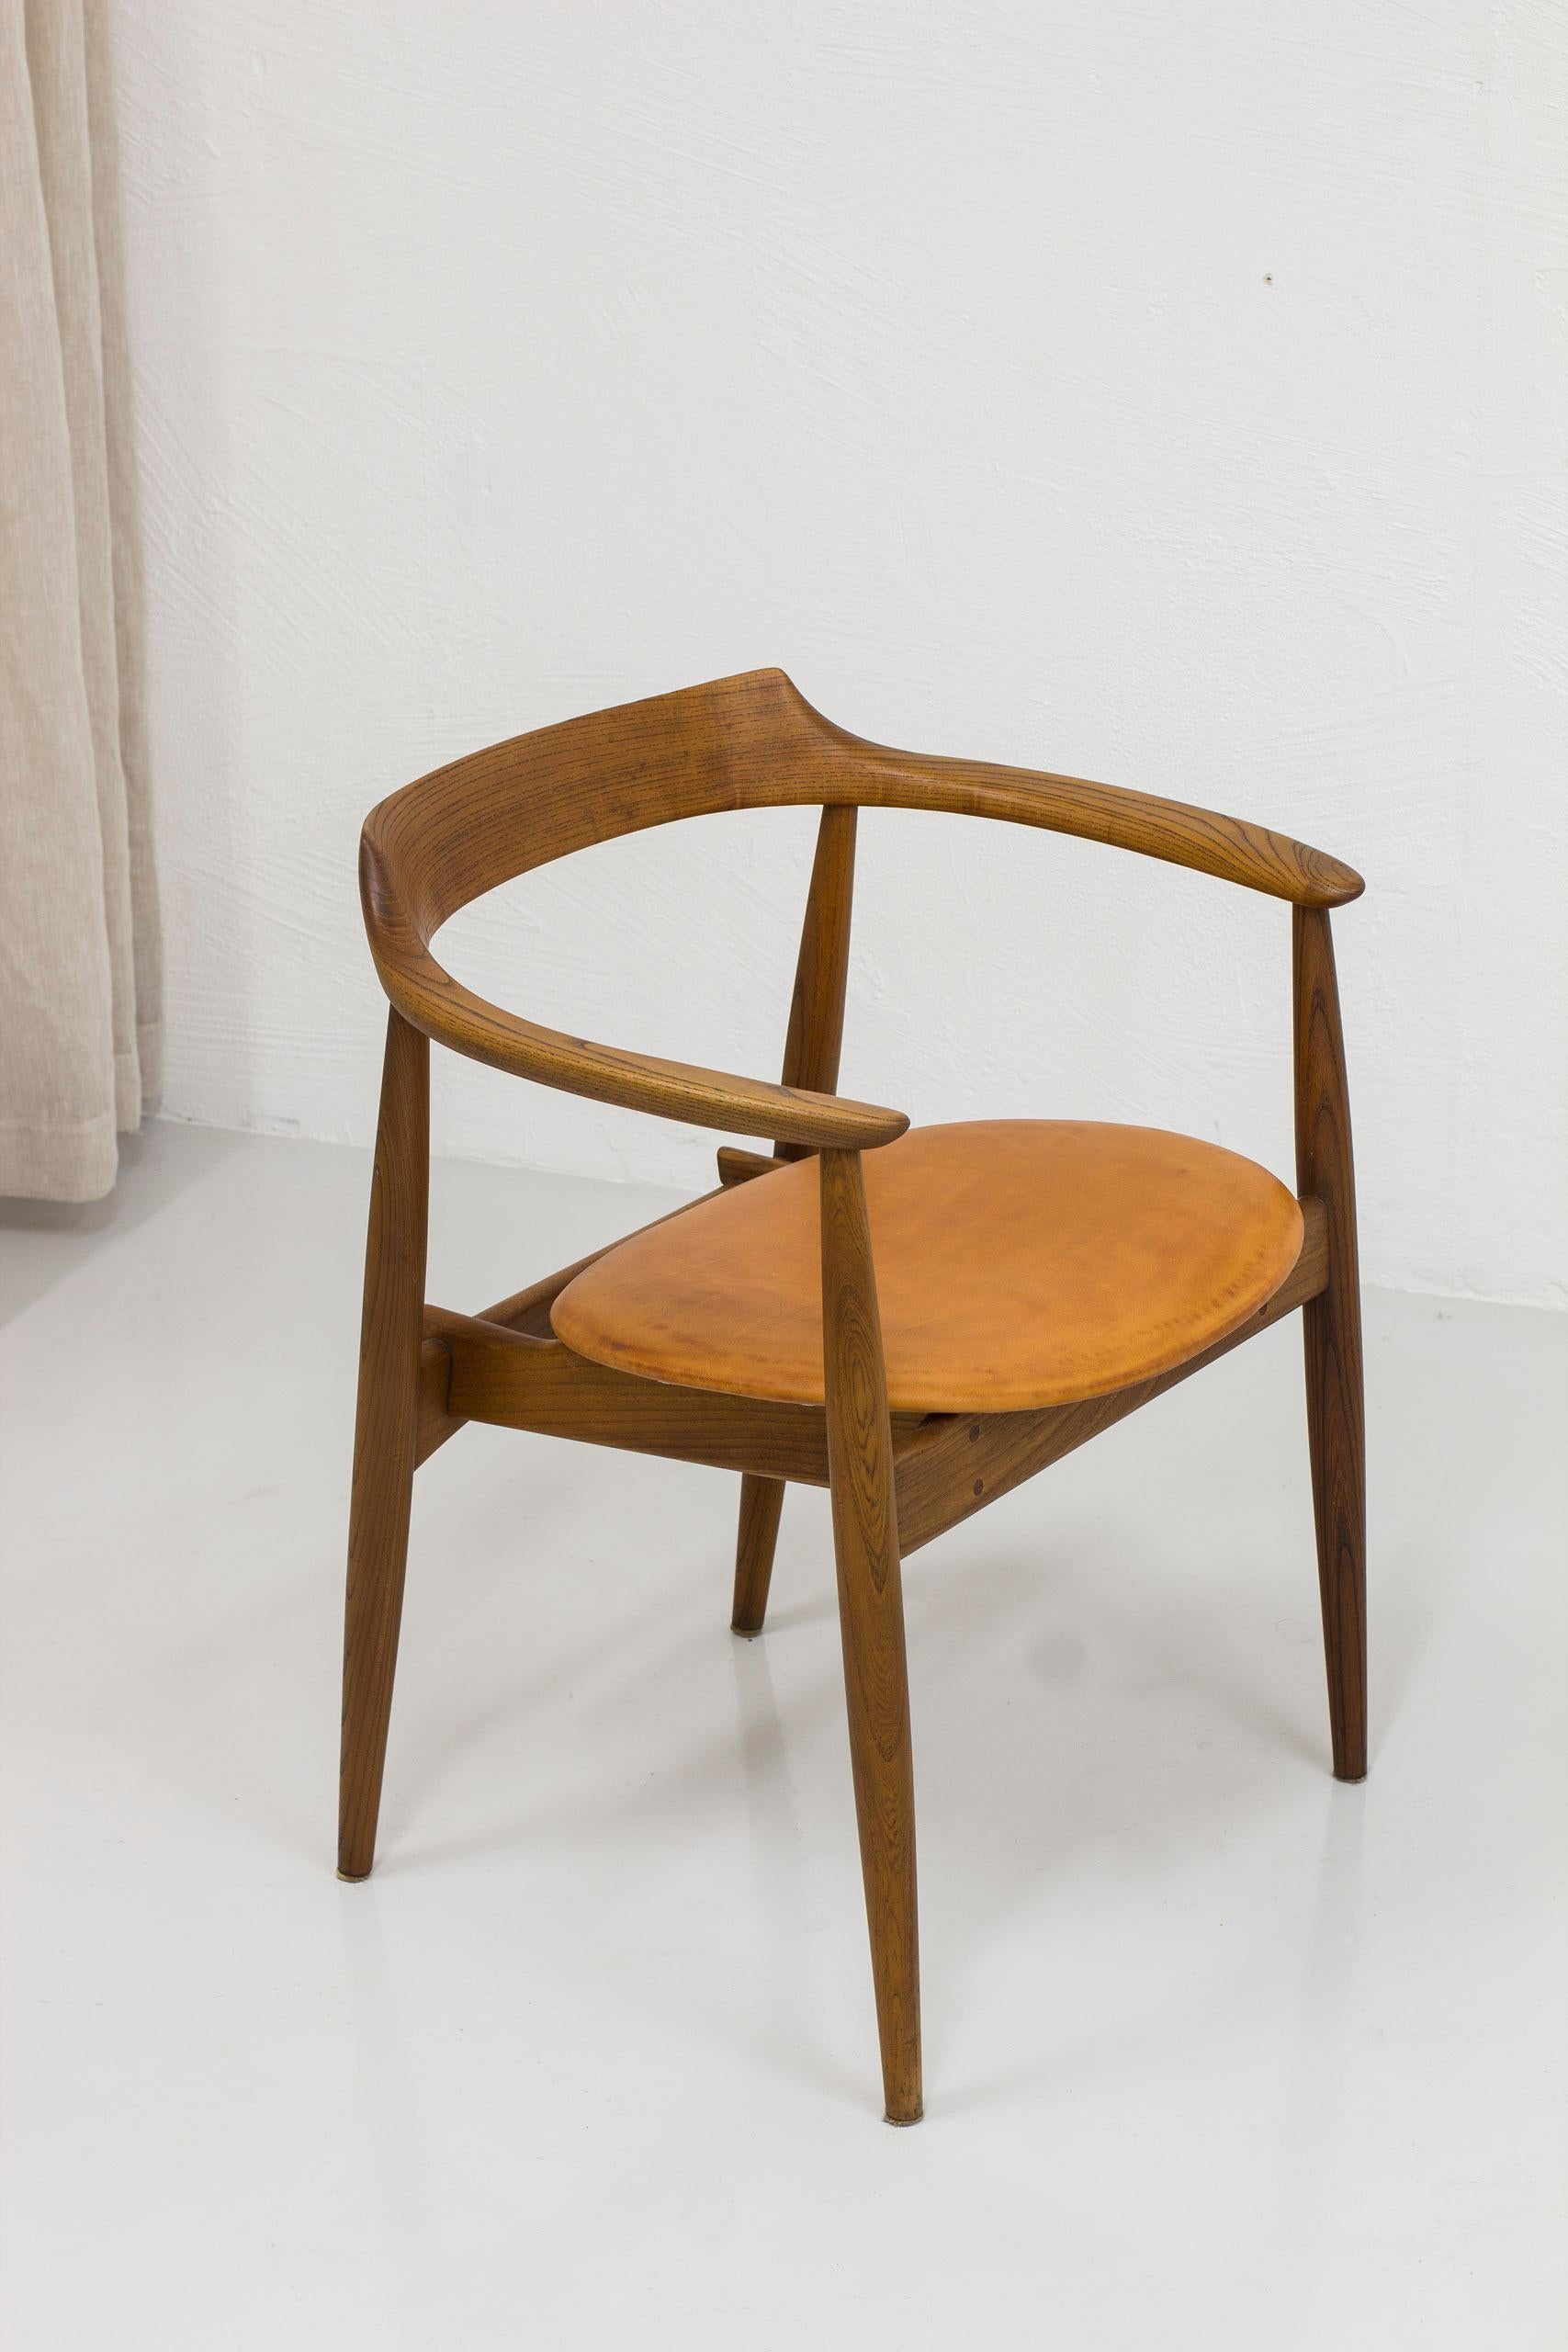 Arm chair in elm and leather with exquisite patina by Arne Wahl Iversen, 1960s For Sale 9